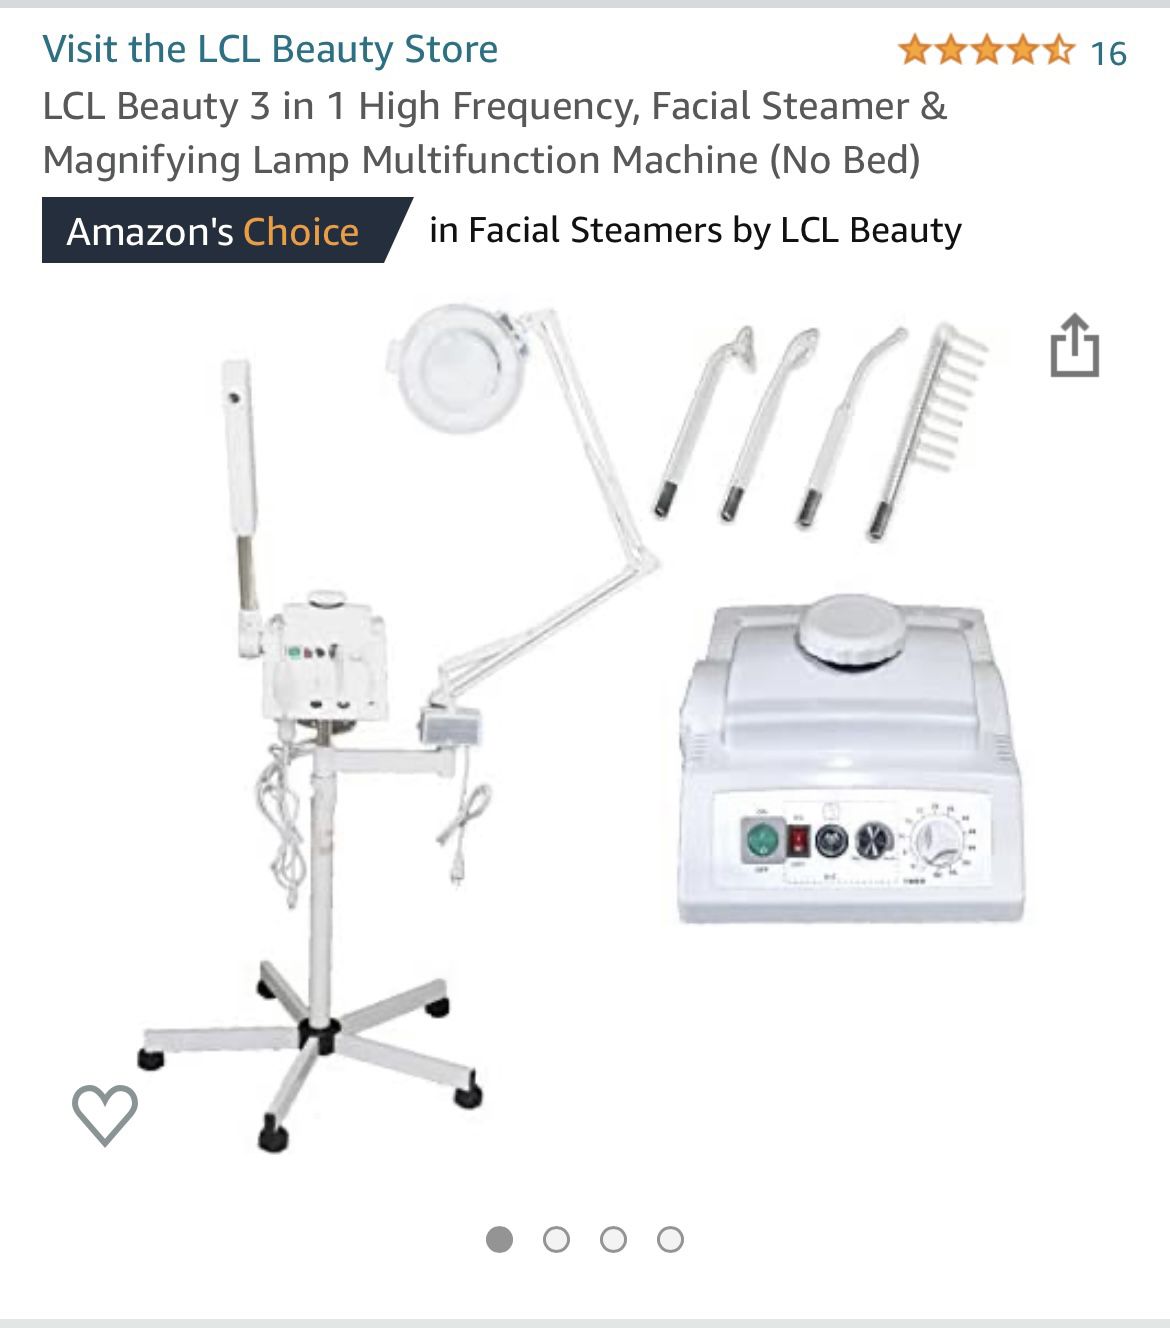 Facial Steamer And Magnifying Lamp 